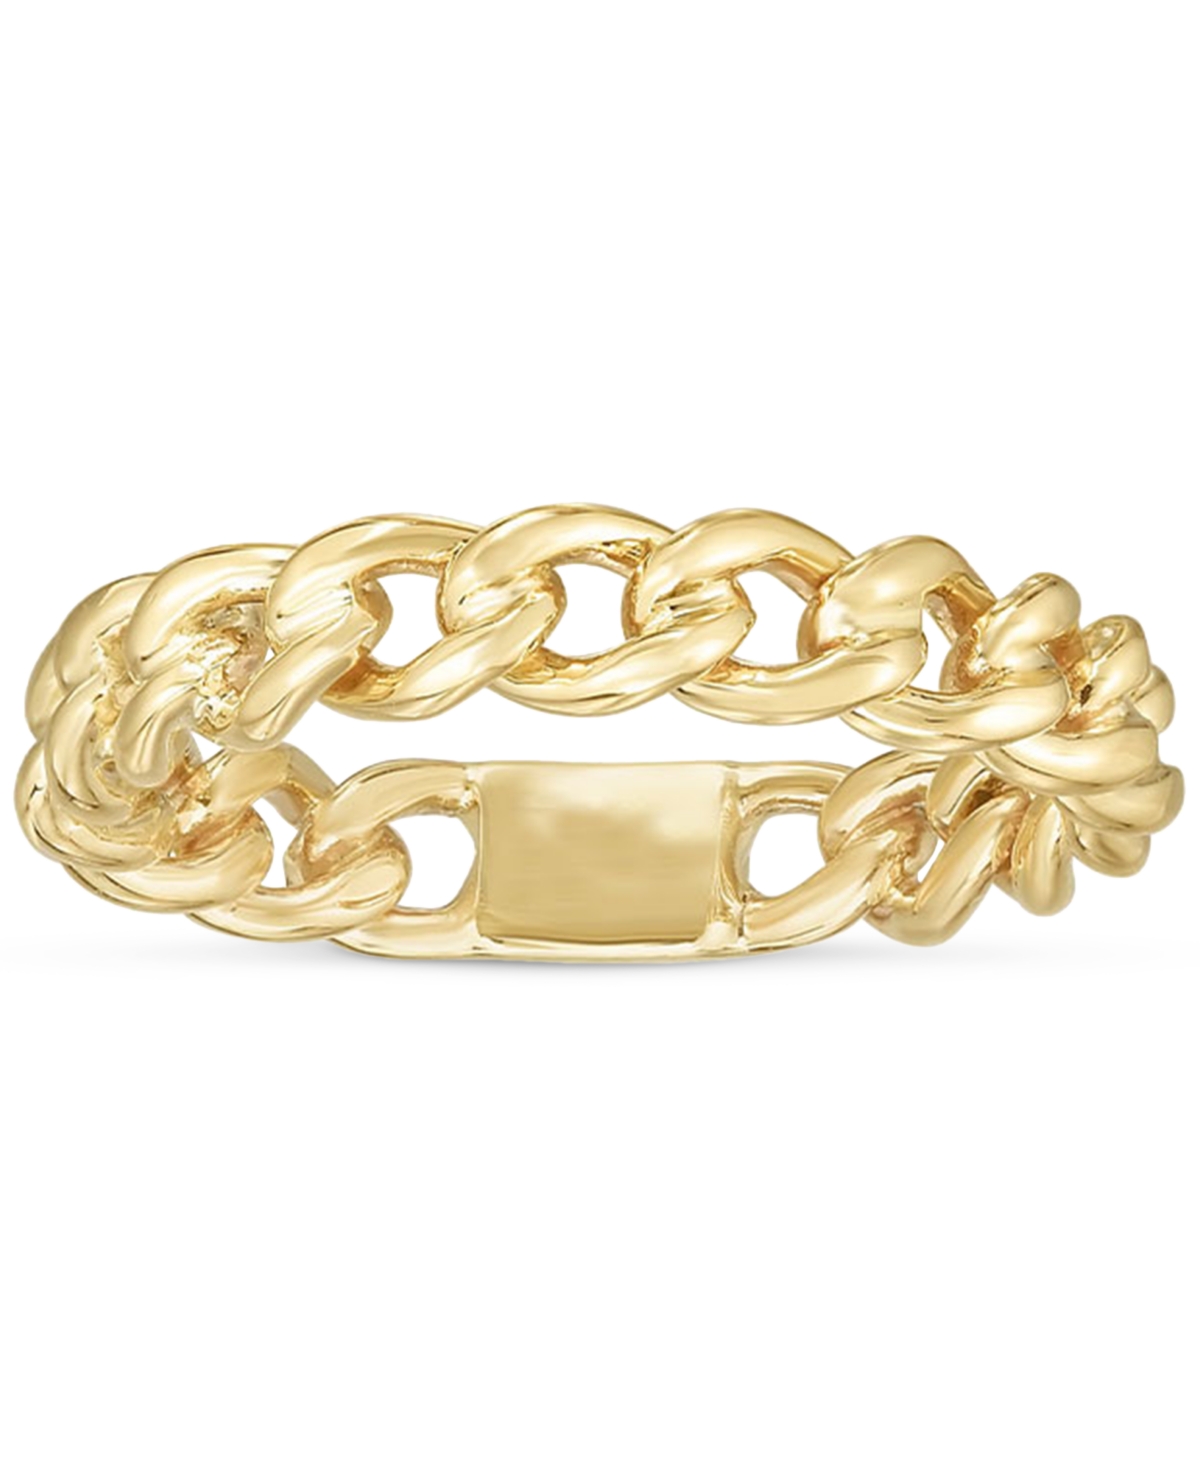 THE LOVERY CURB LINK CHAIN-STYLE STATEMENT RING IN 14K GOLD